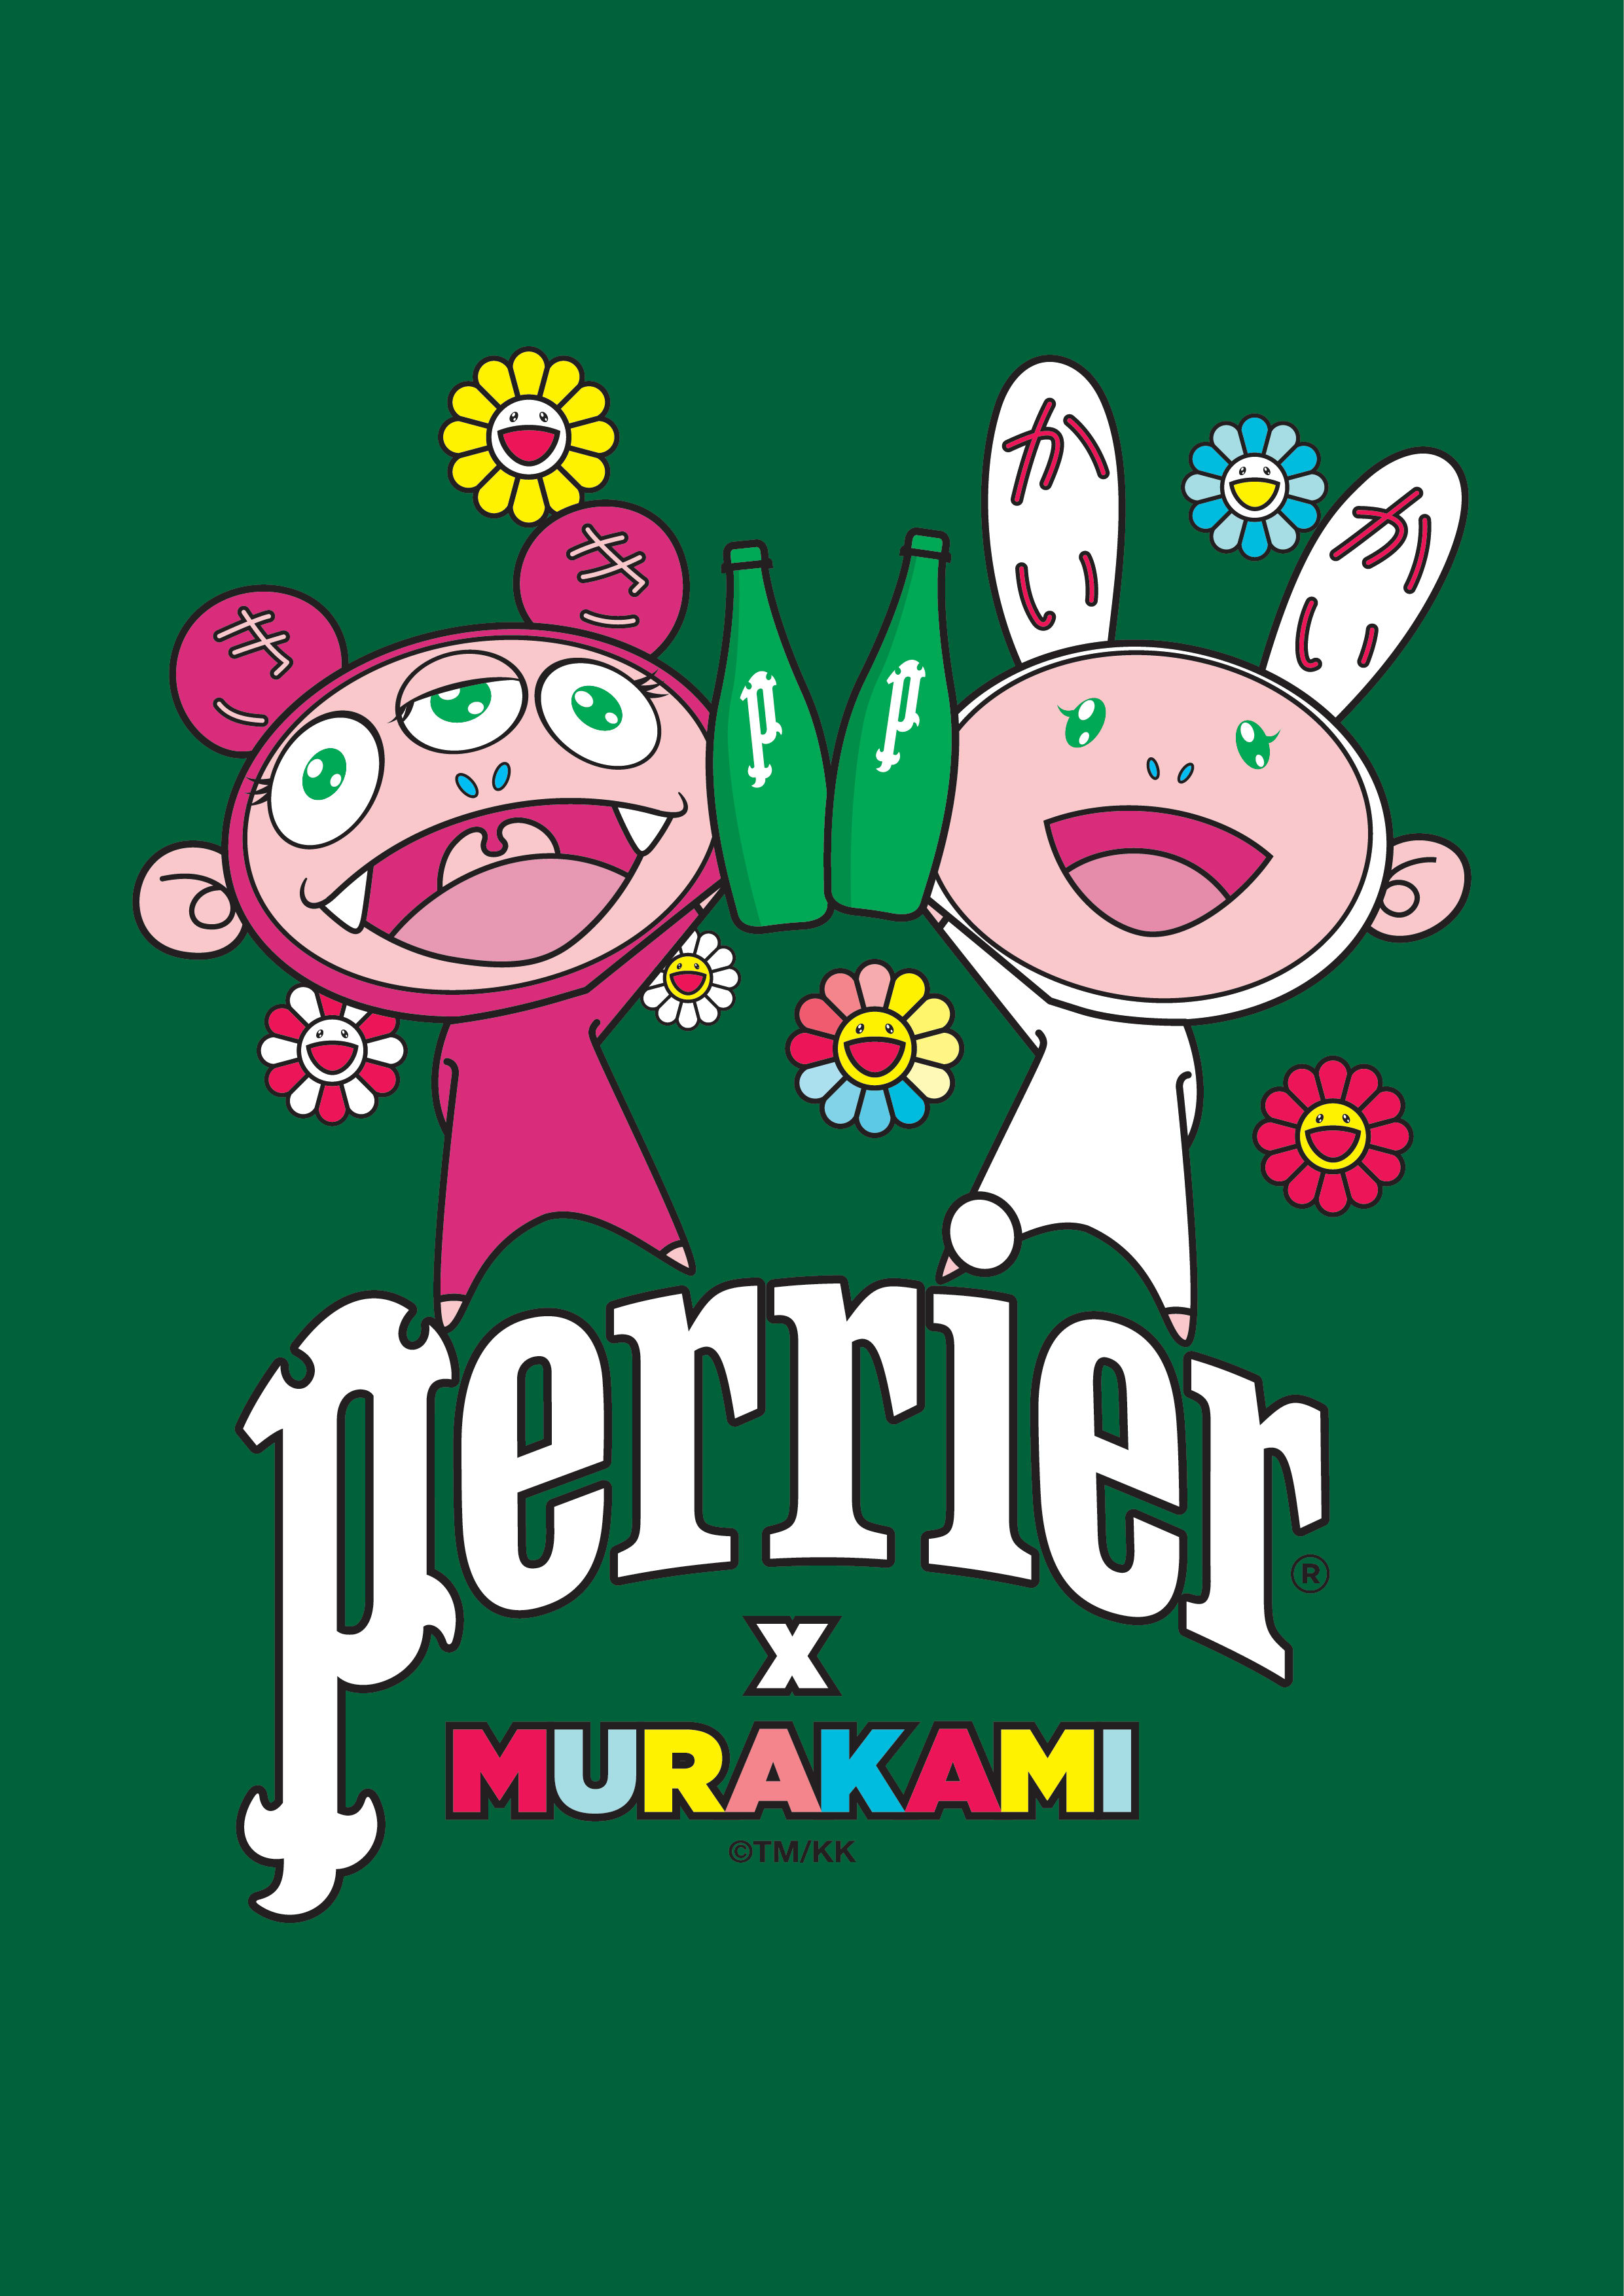 Perrier announces a new collaboration with renowned artist Takashi Murakami  - Brand License